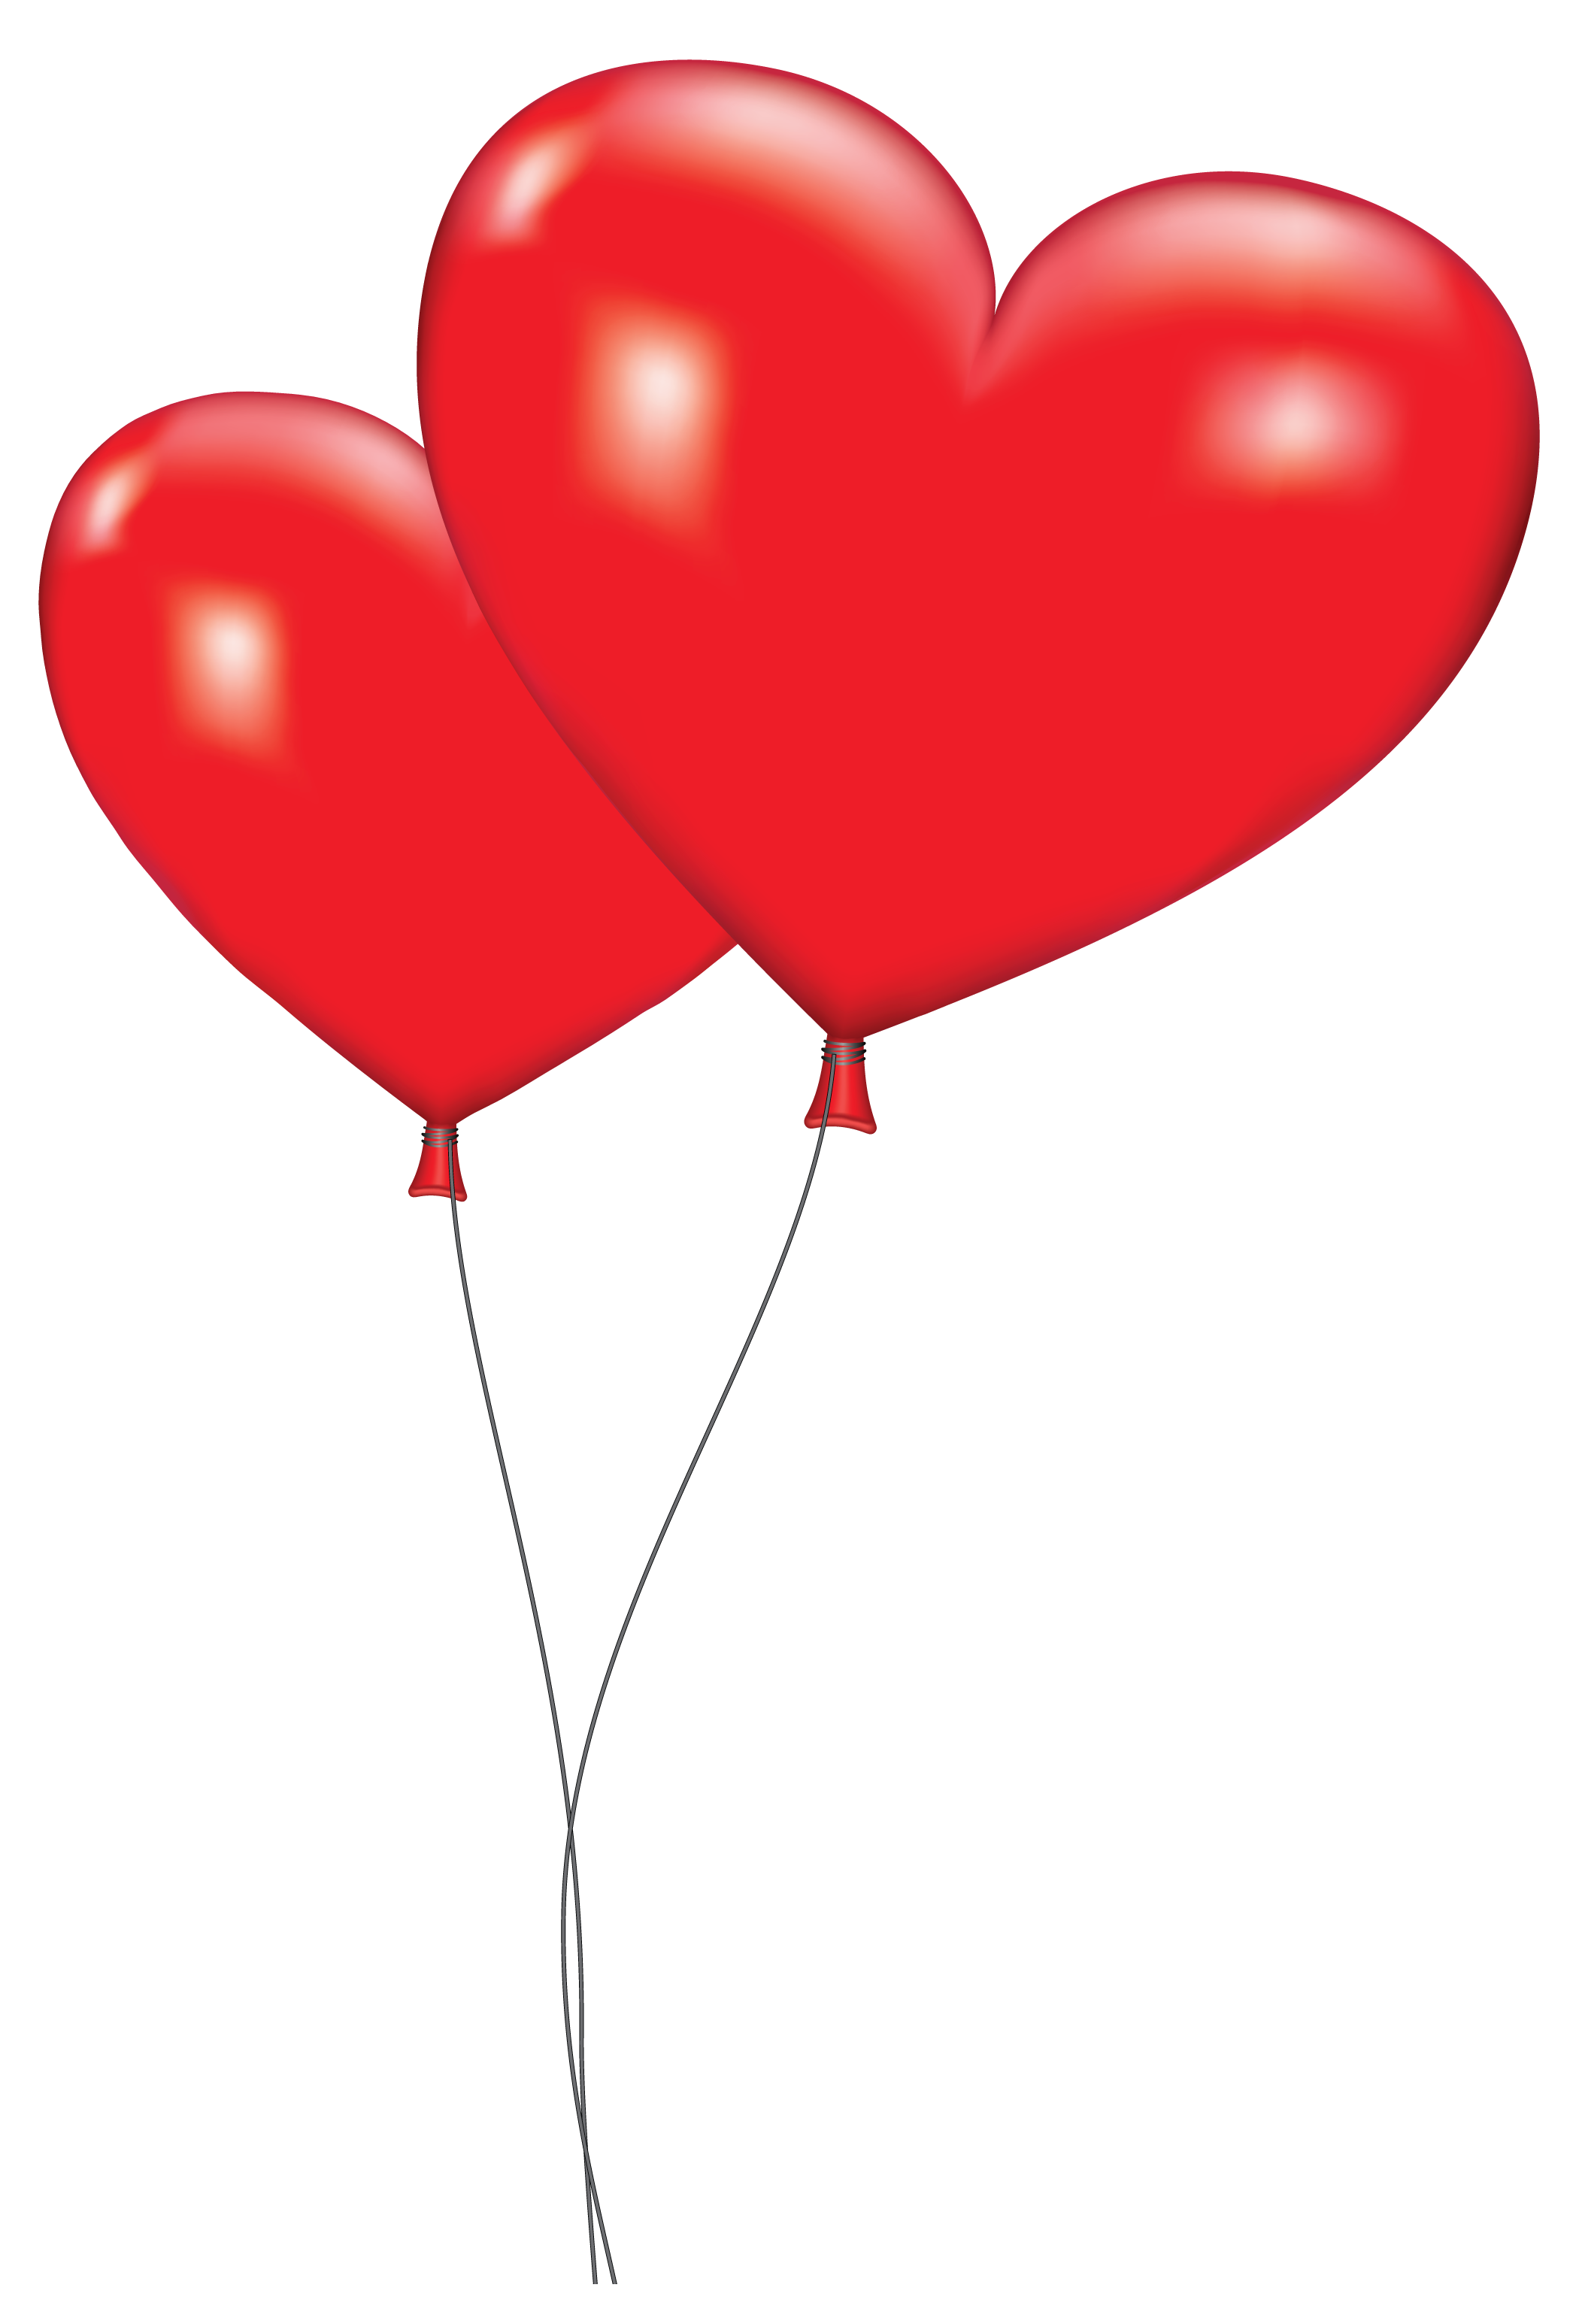 Pix For > Red Balloon Clipart